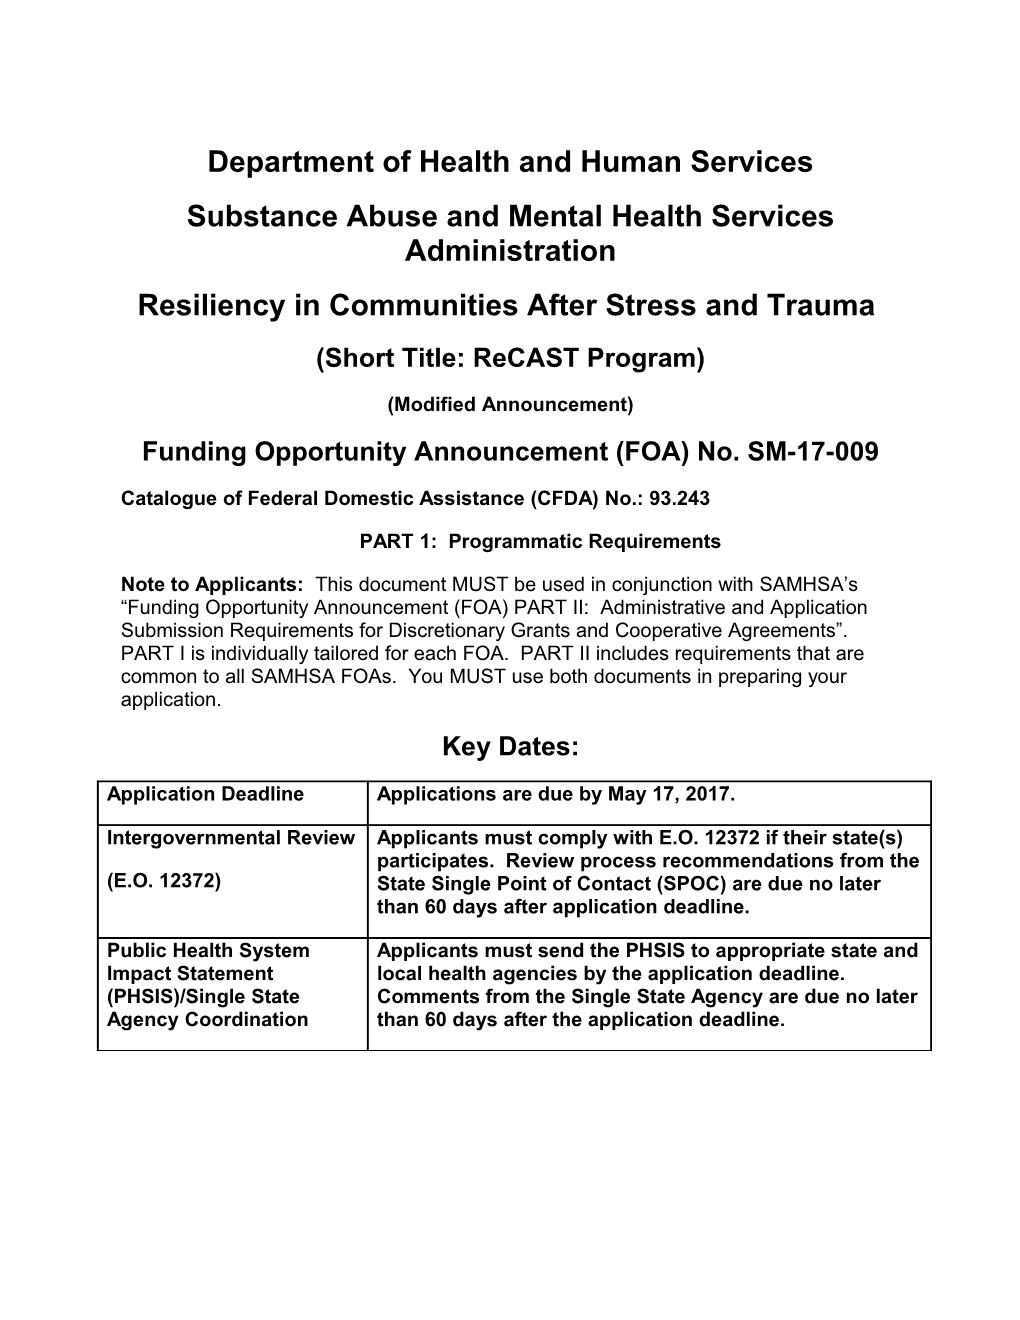 FOA: SM-17-009, Resiliency in Communities After Stress and Trauma